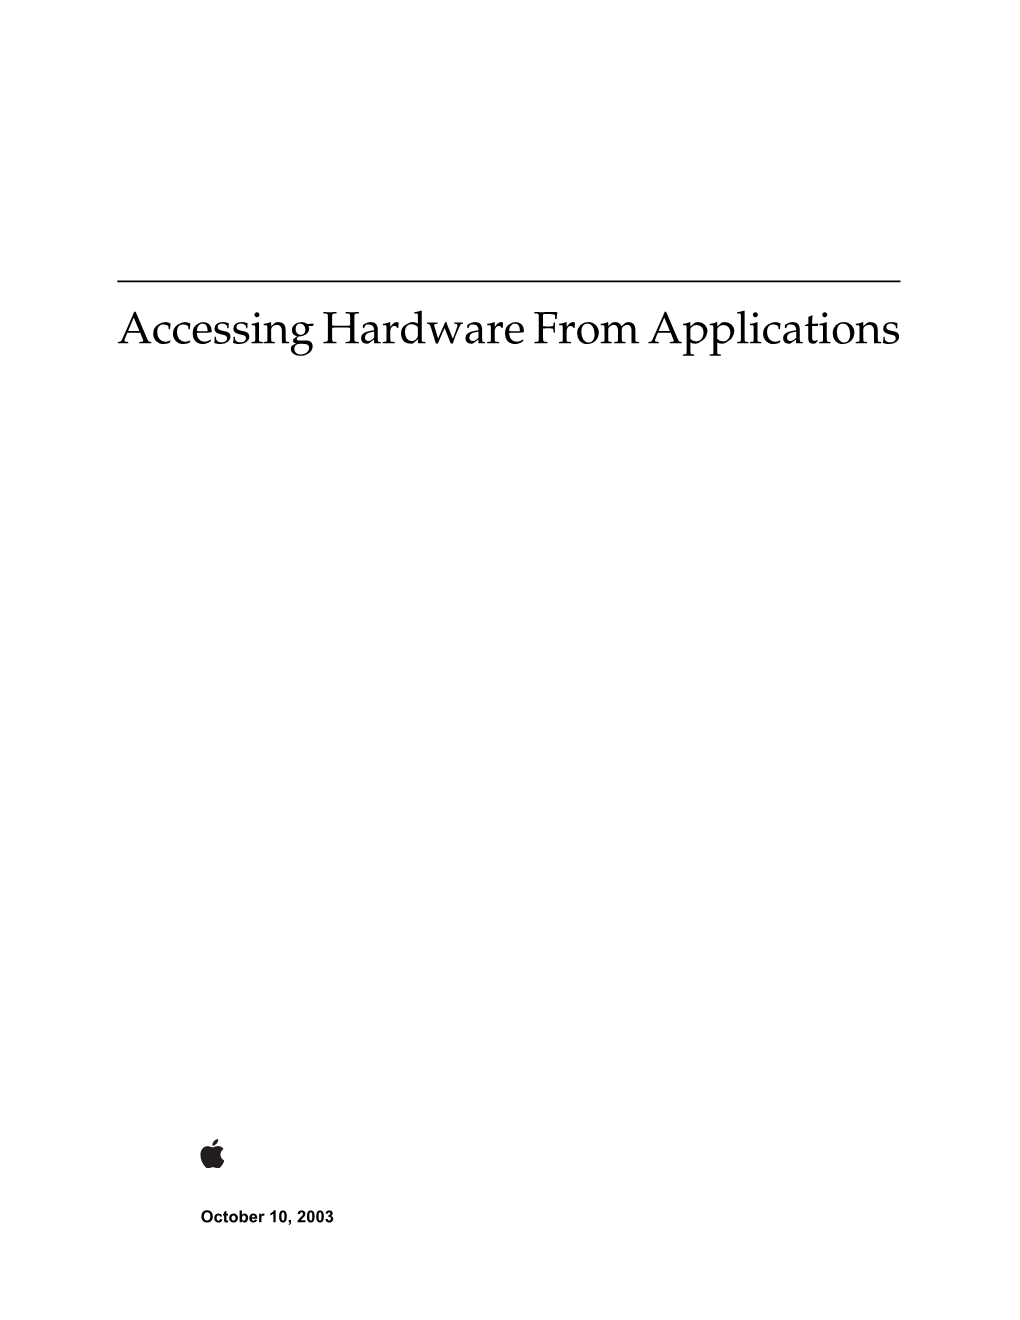 Accessing Hardware from Applications